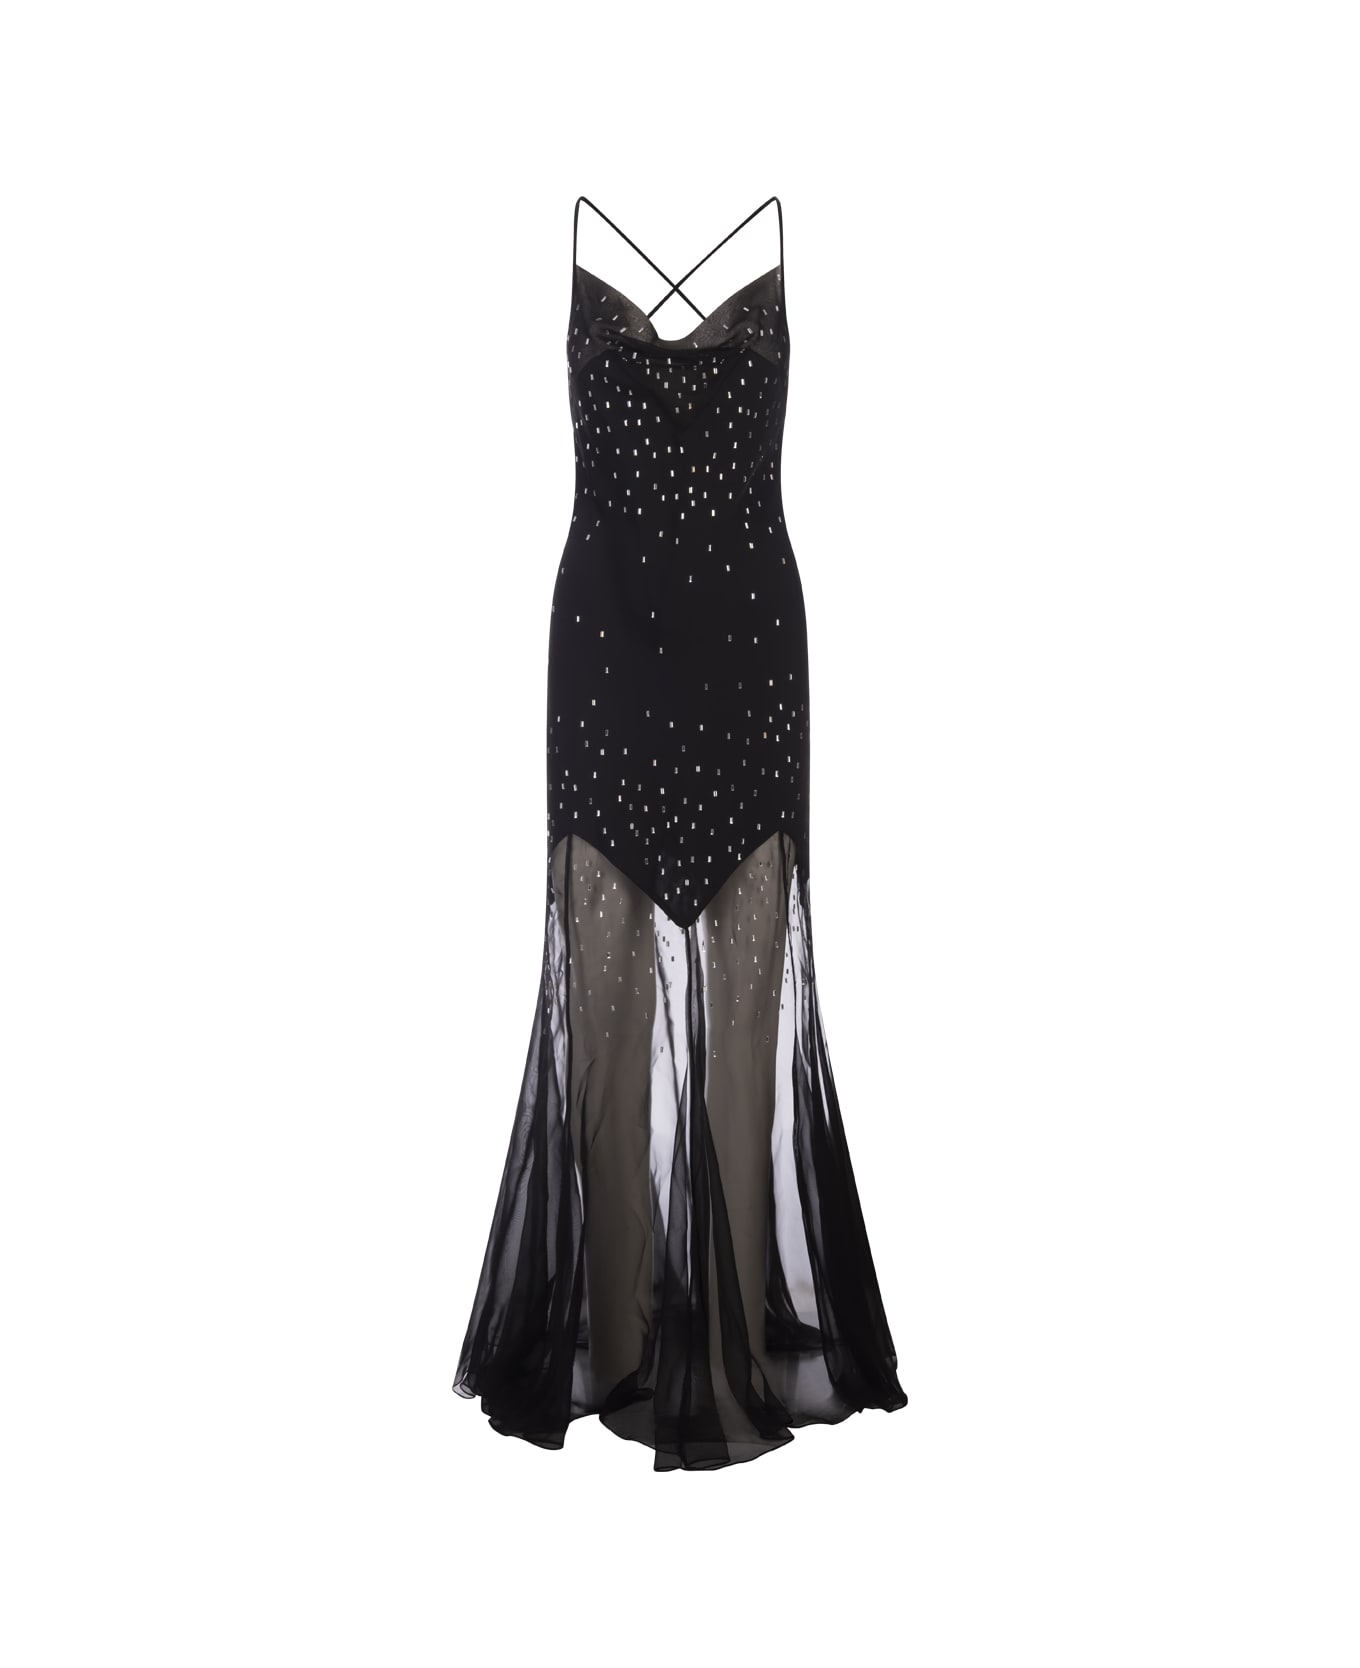 Paco Rabanne Long Black Dress With Crystals - Black